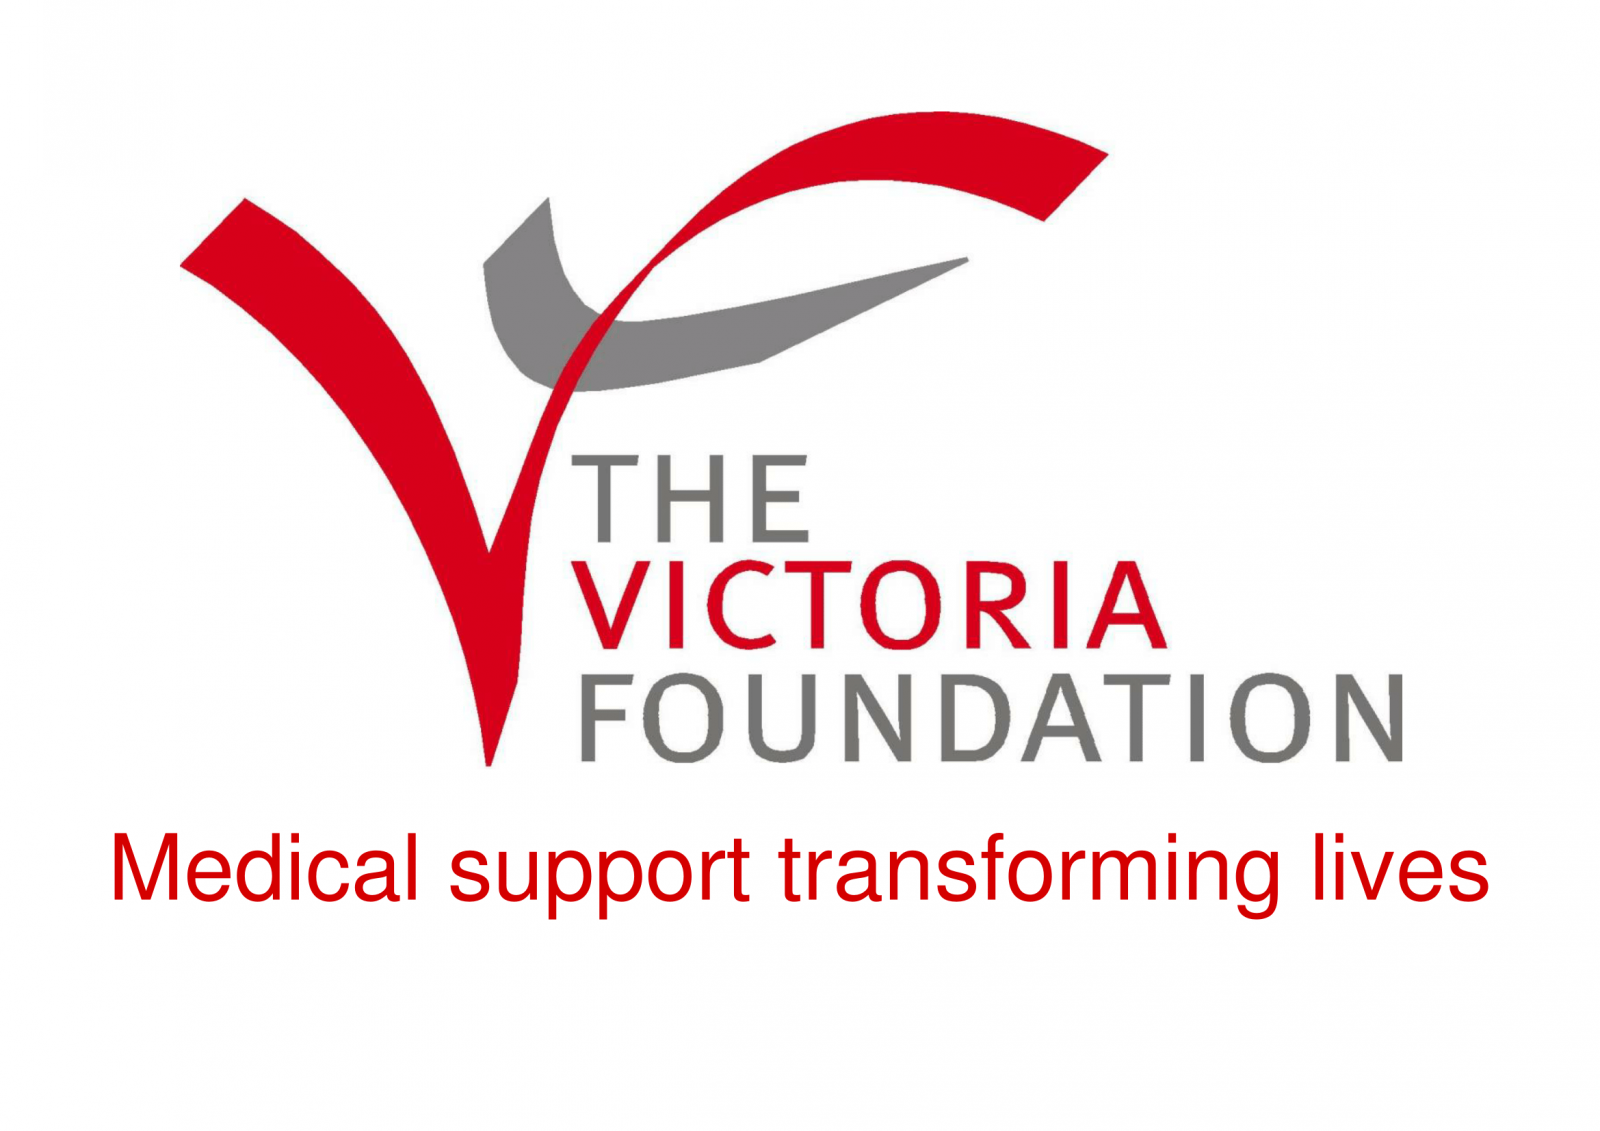 The Victoria Foundation transforming lives 